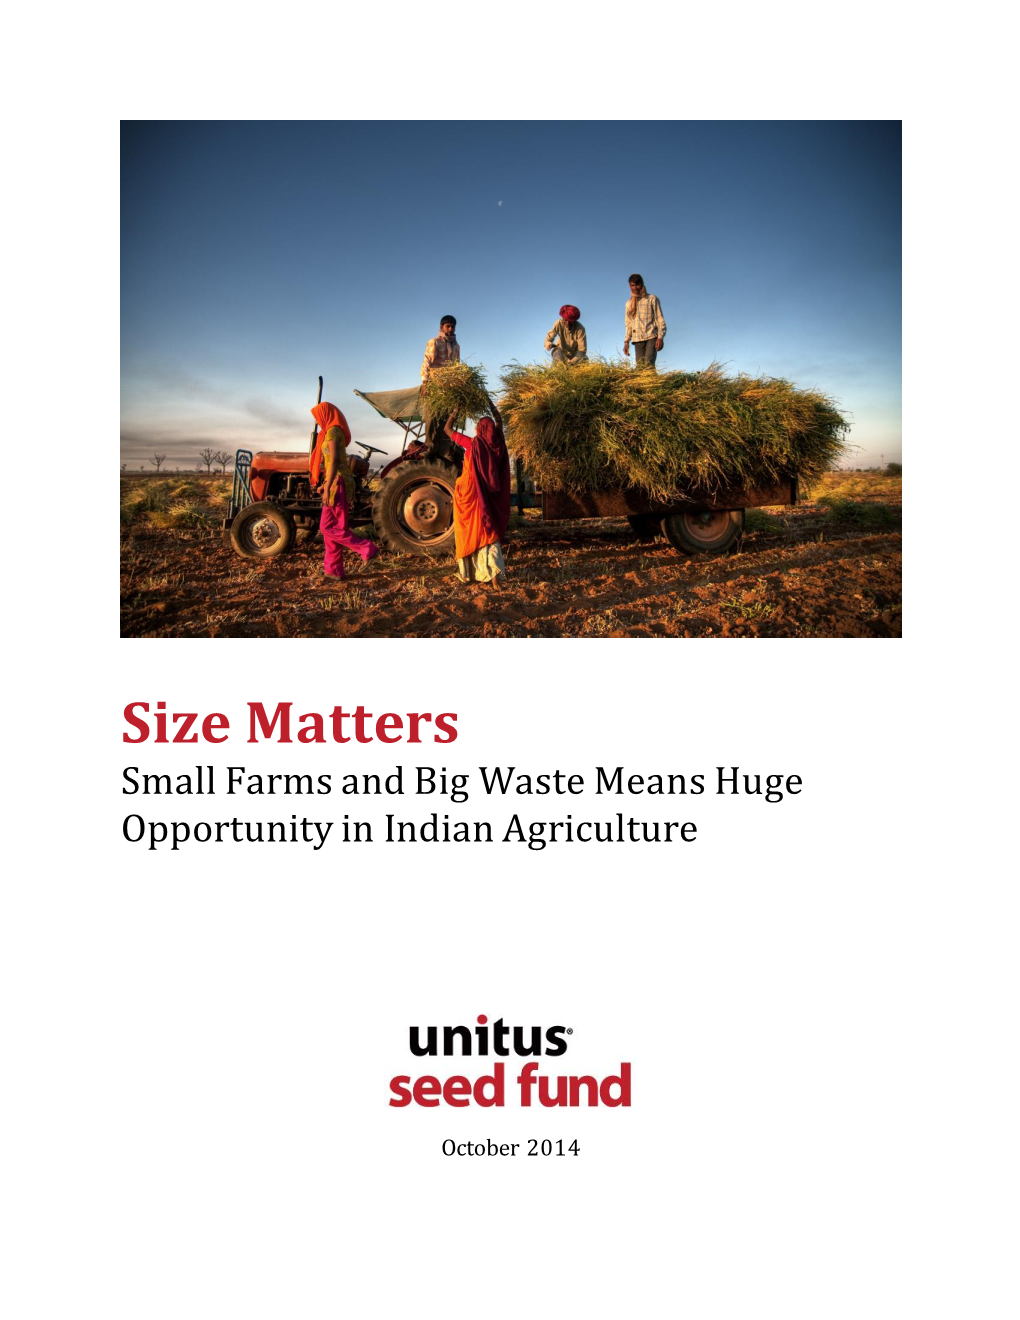 Size Matters Small Farms and Big Waste Means Huge Opportunity in Indian Agriculture